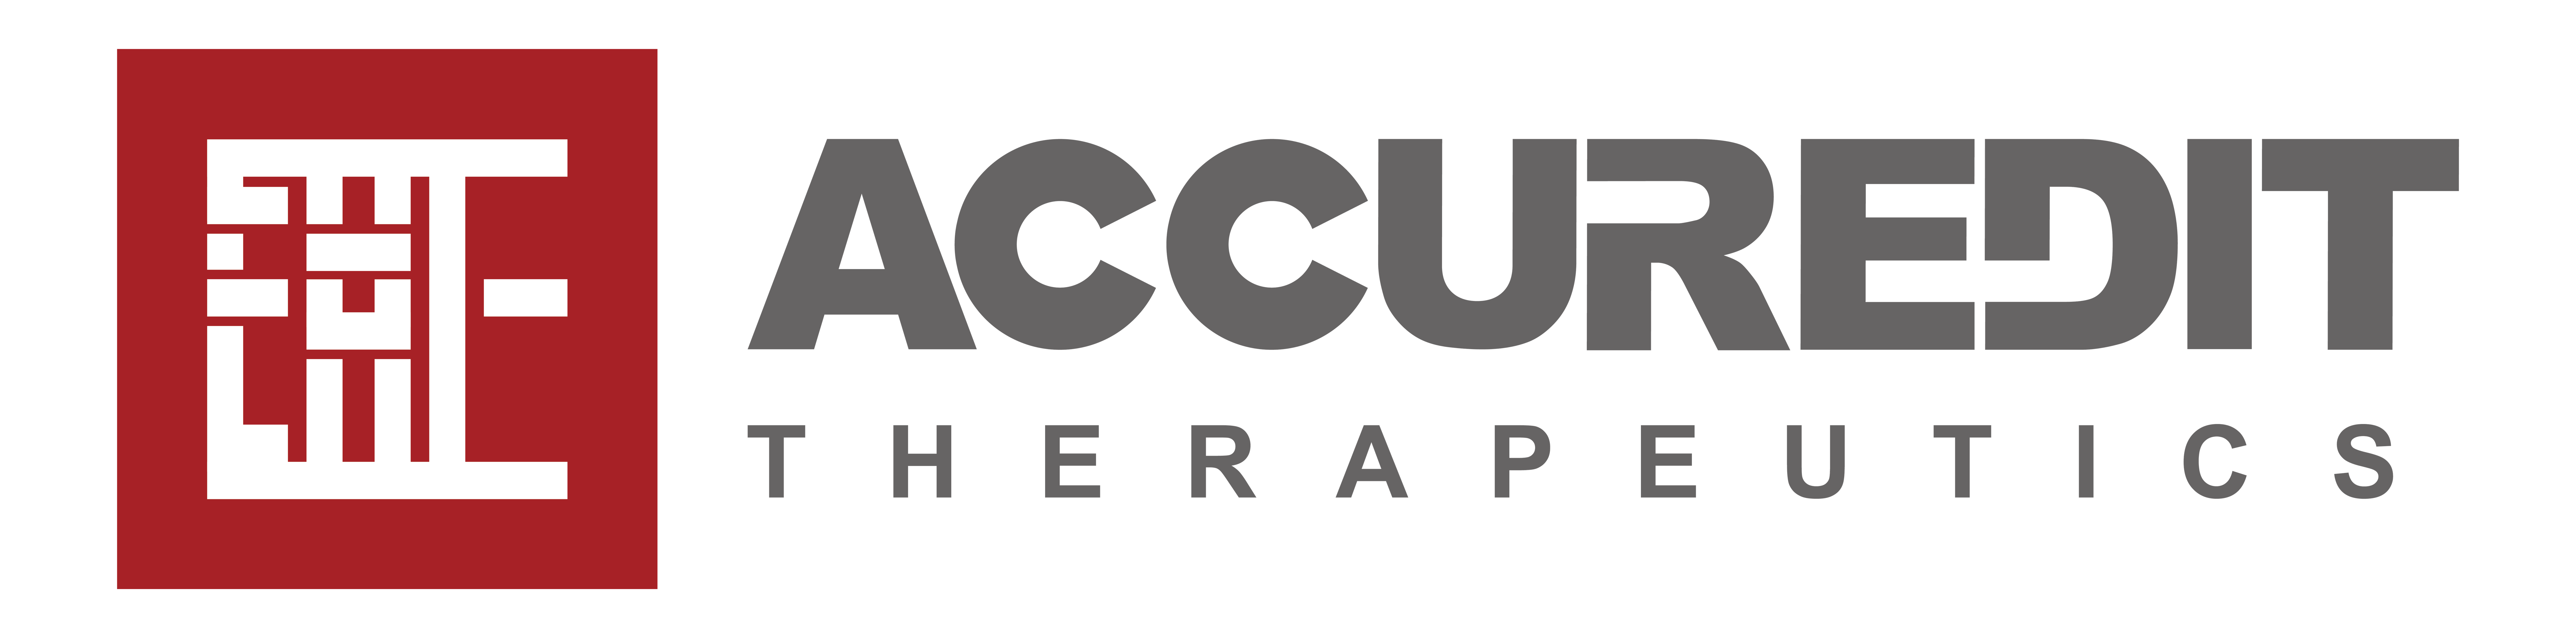 Accuredit Therapeutics US limited